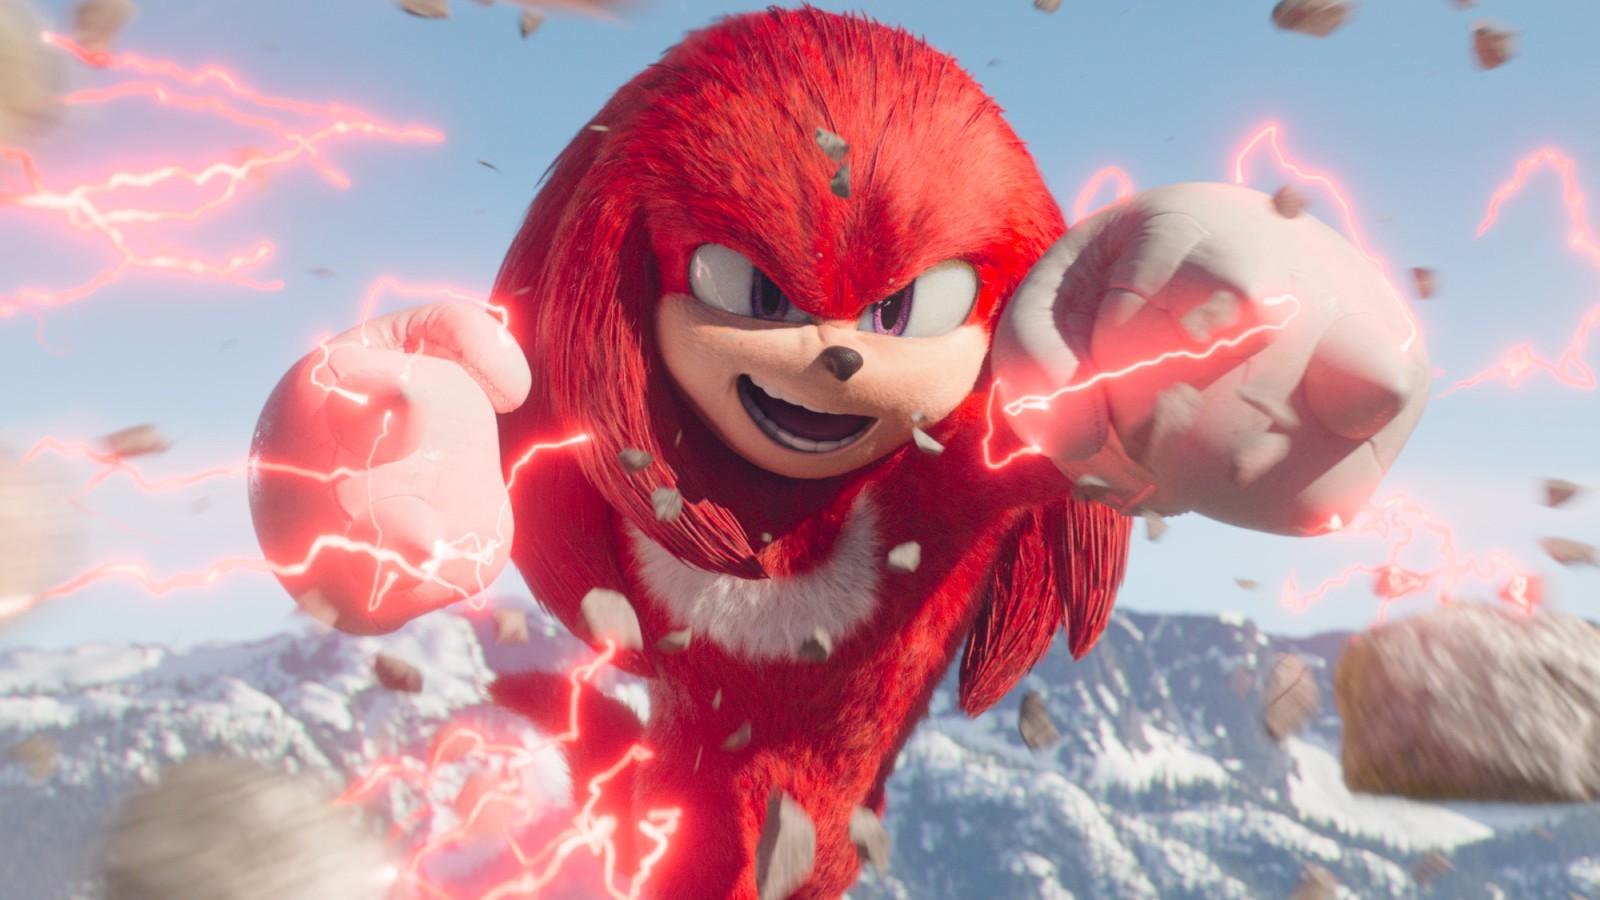 A still from the Knuckles TV series